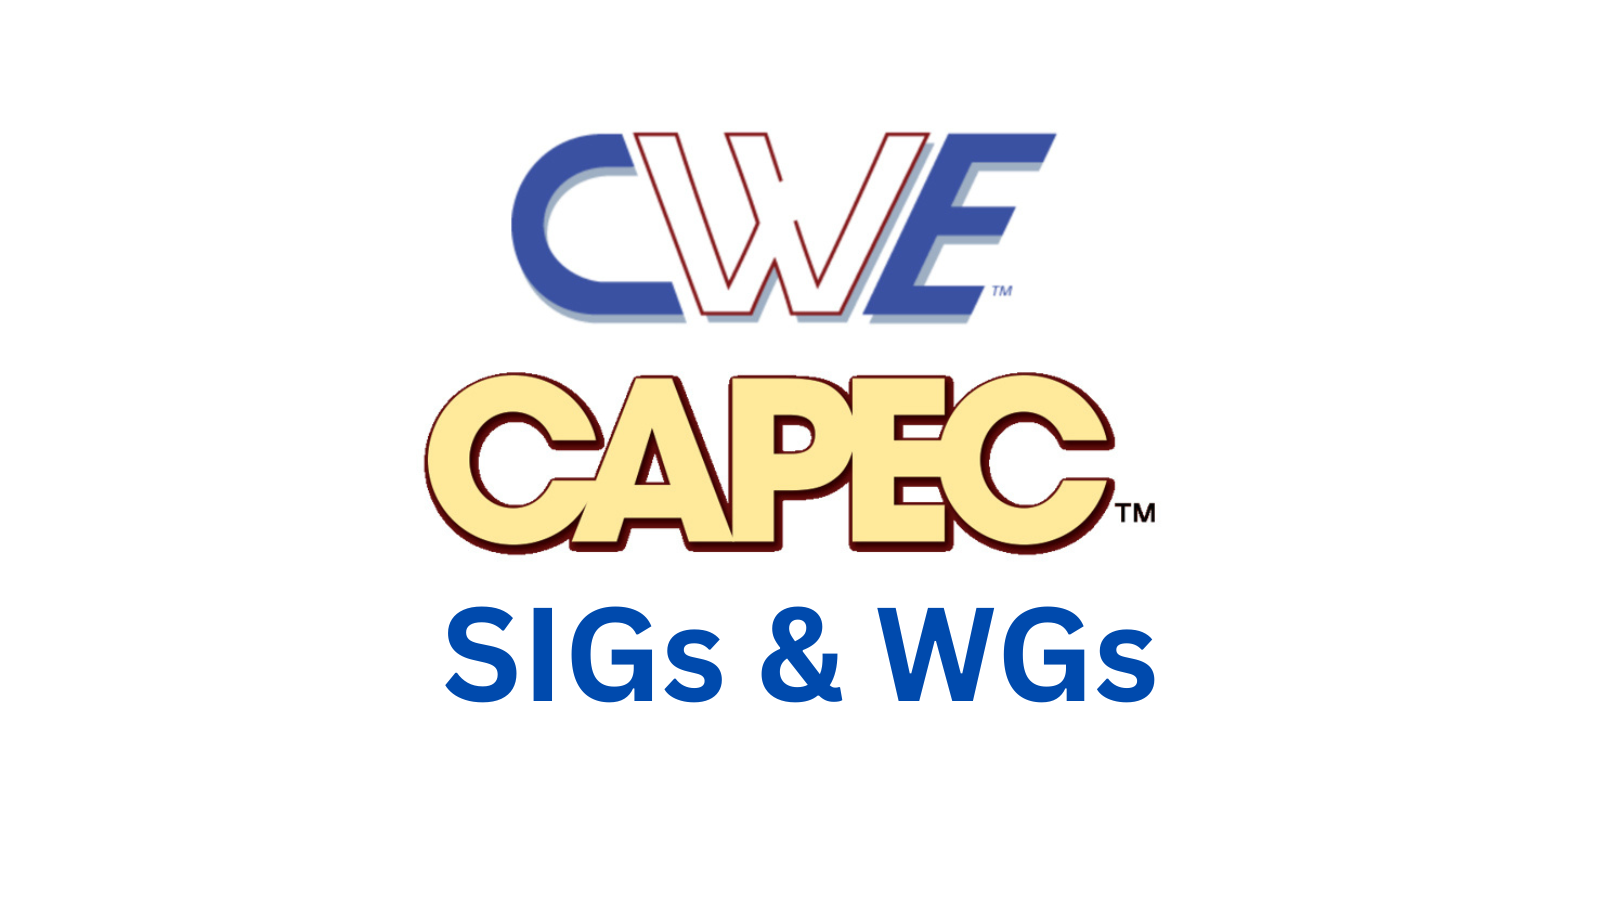 CWE/CAPEC SIGs & WGs